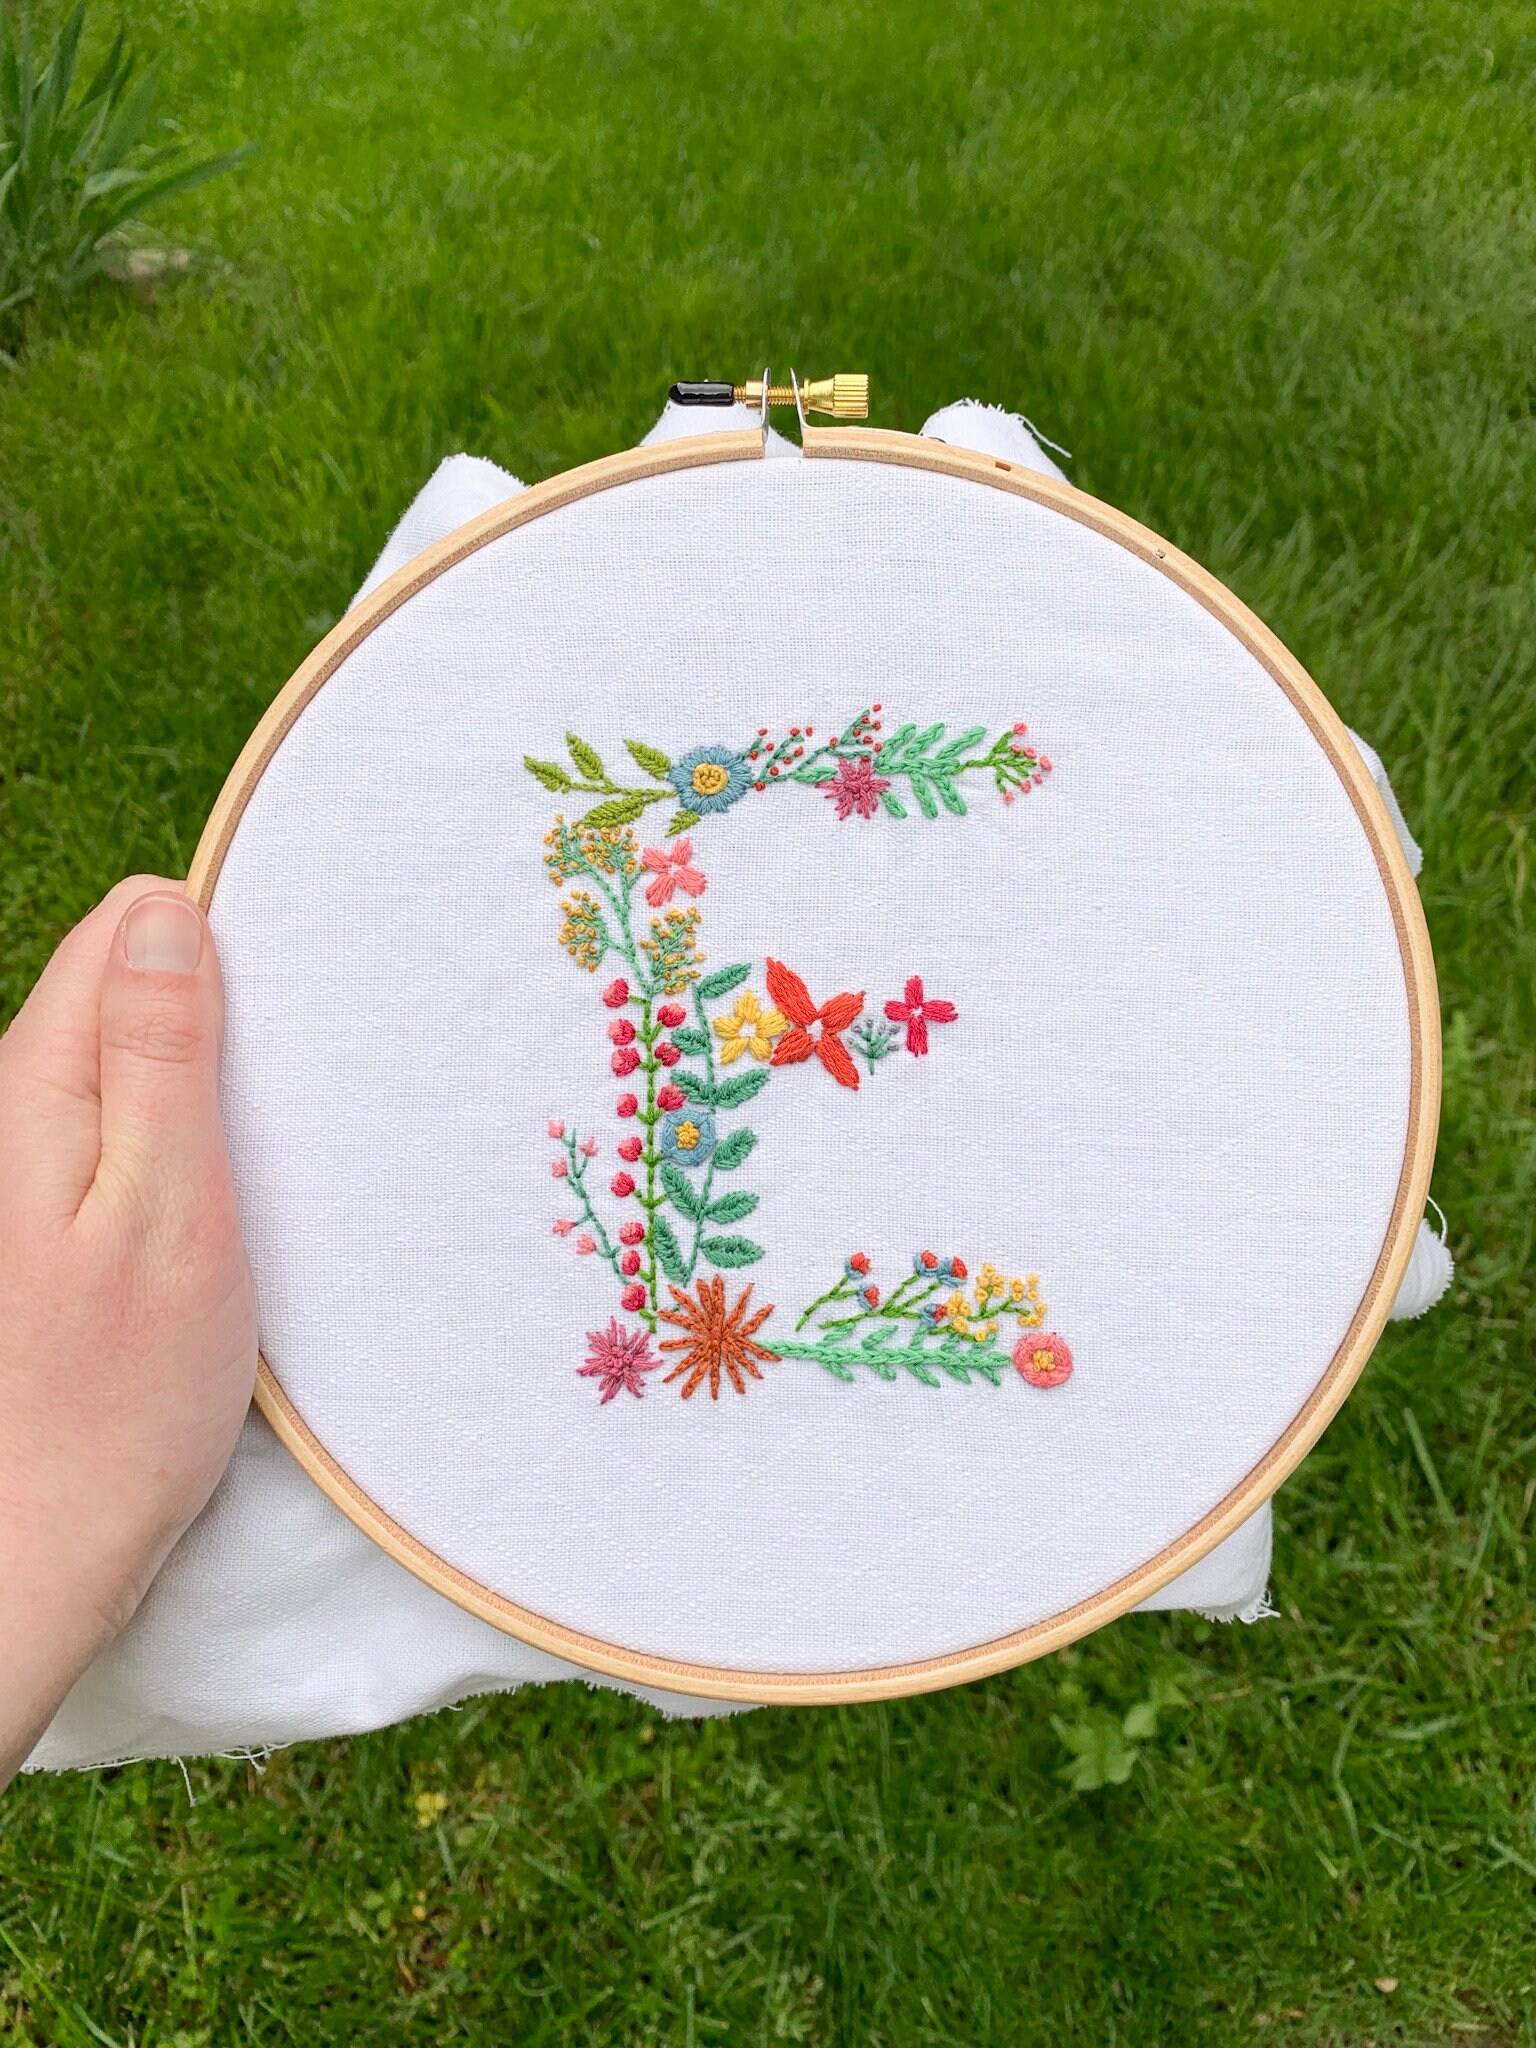 Manlo Full Embroidery Light Flower Stamped Cross Stitch 11CT DIY